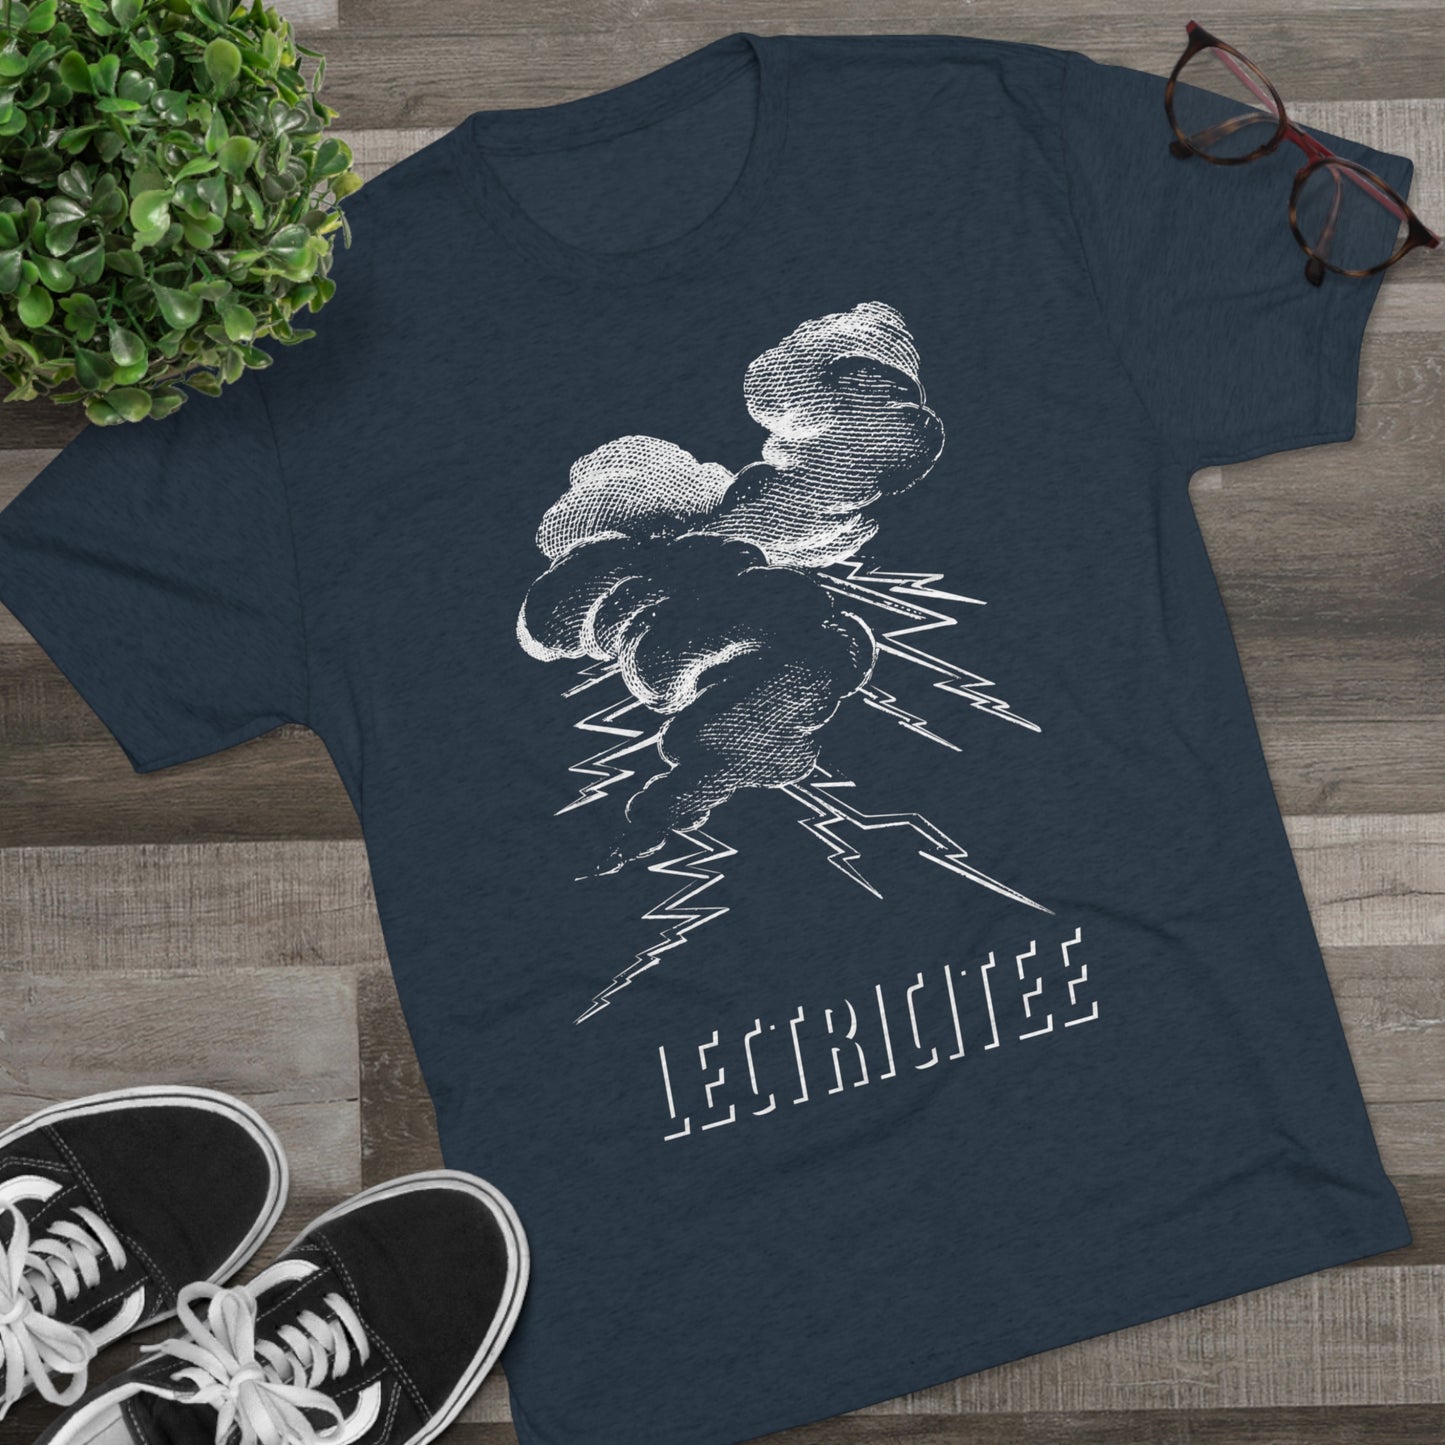 LectriciTee Logo Front Print Triblend Tee